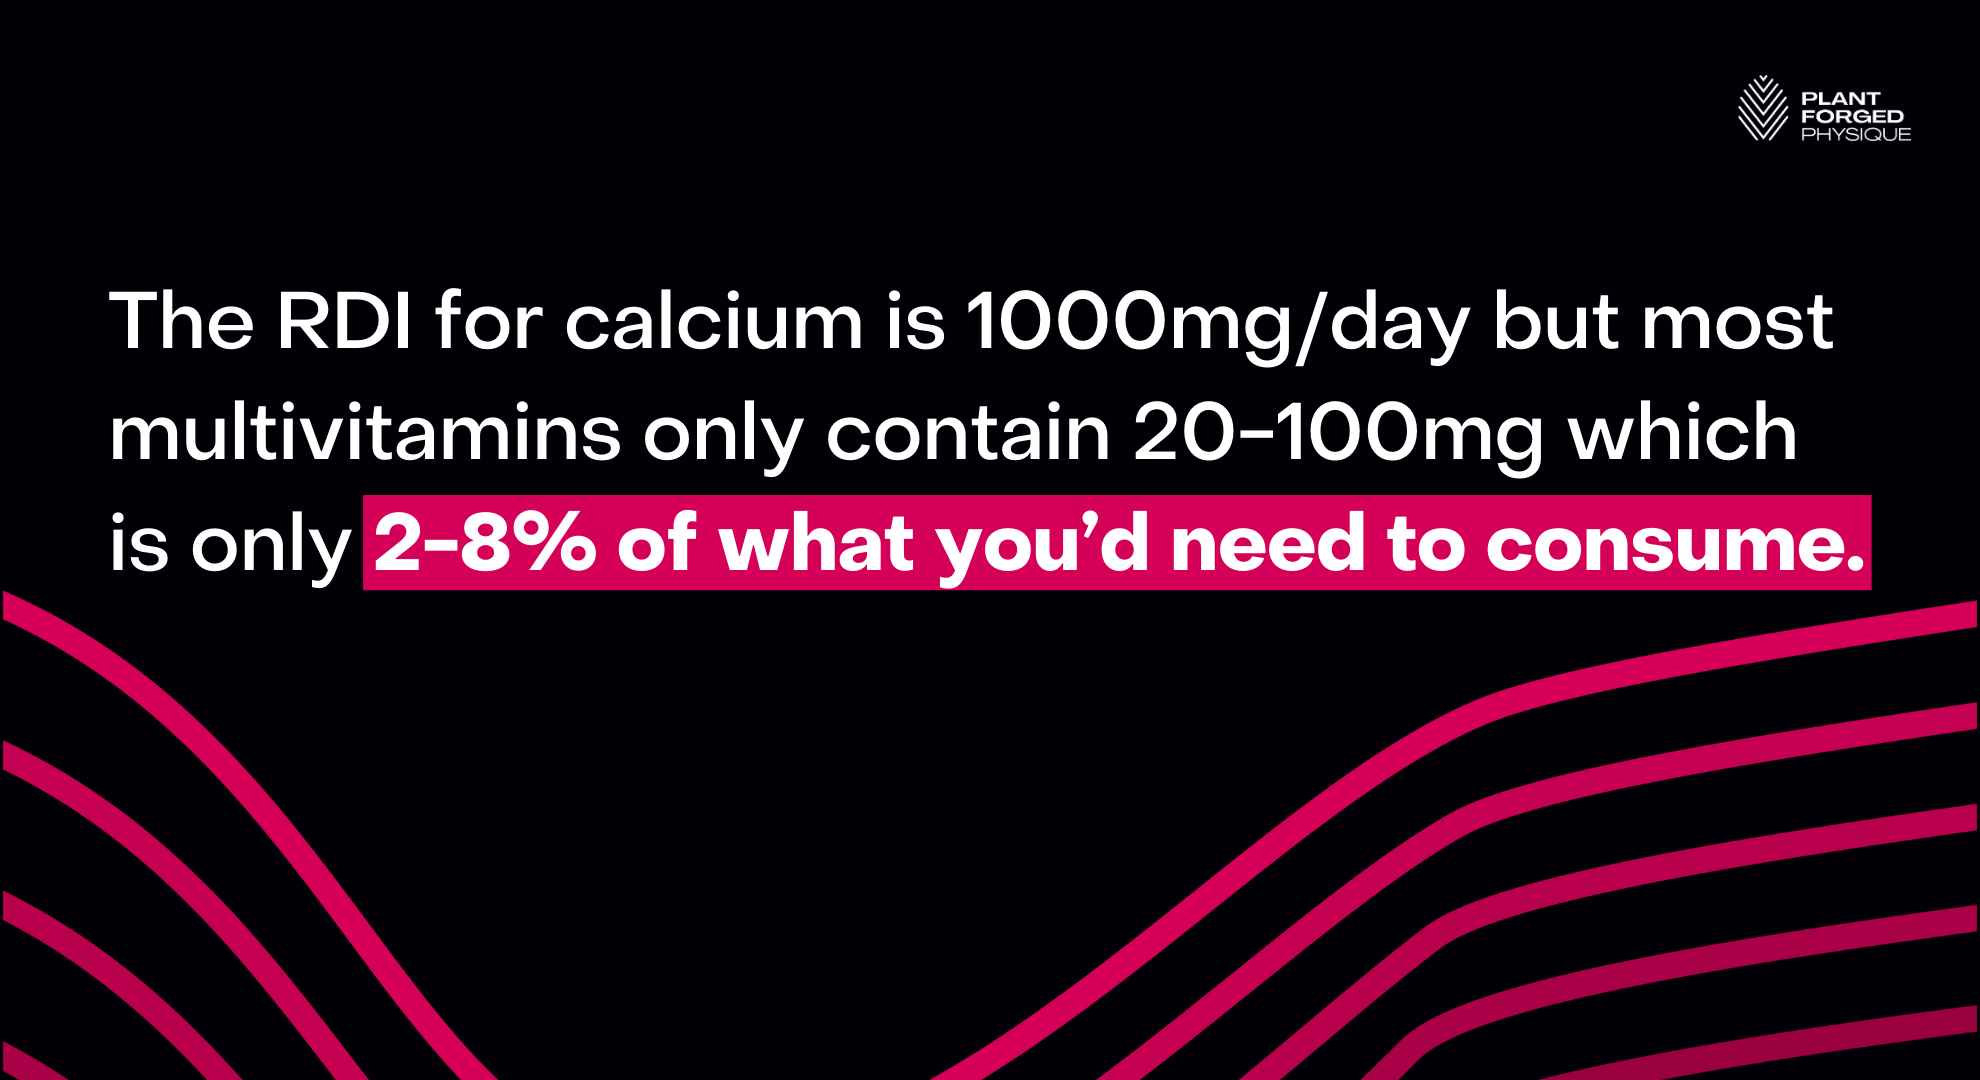 The RDI for calcium is 1000mg/day but most multivitamins only contain 20-100mg which is only 2-8% of what you'd need to consume.